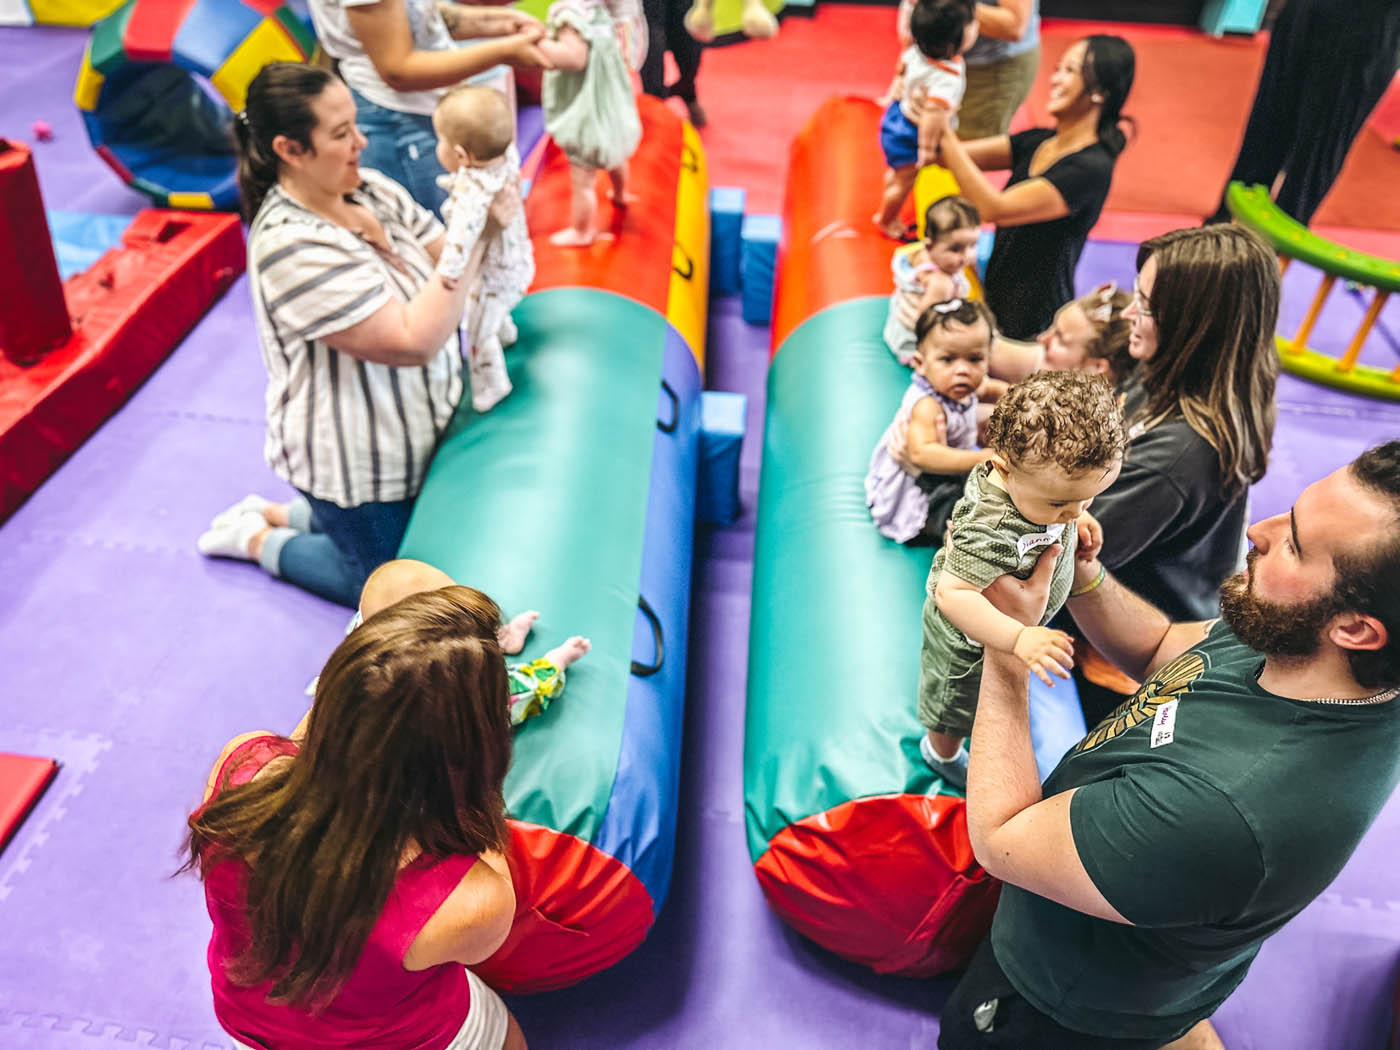 A group of parent and children enjoying Romp n' Roll's gym, review our frequently asked questions at Romp n' Roll.